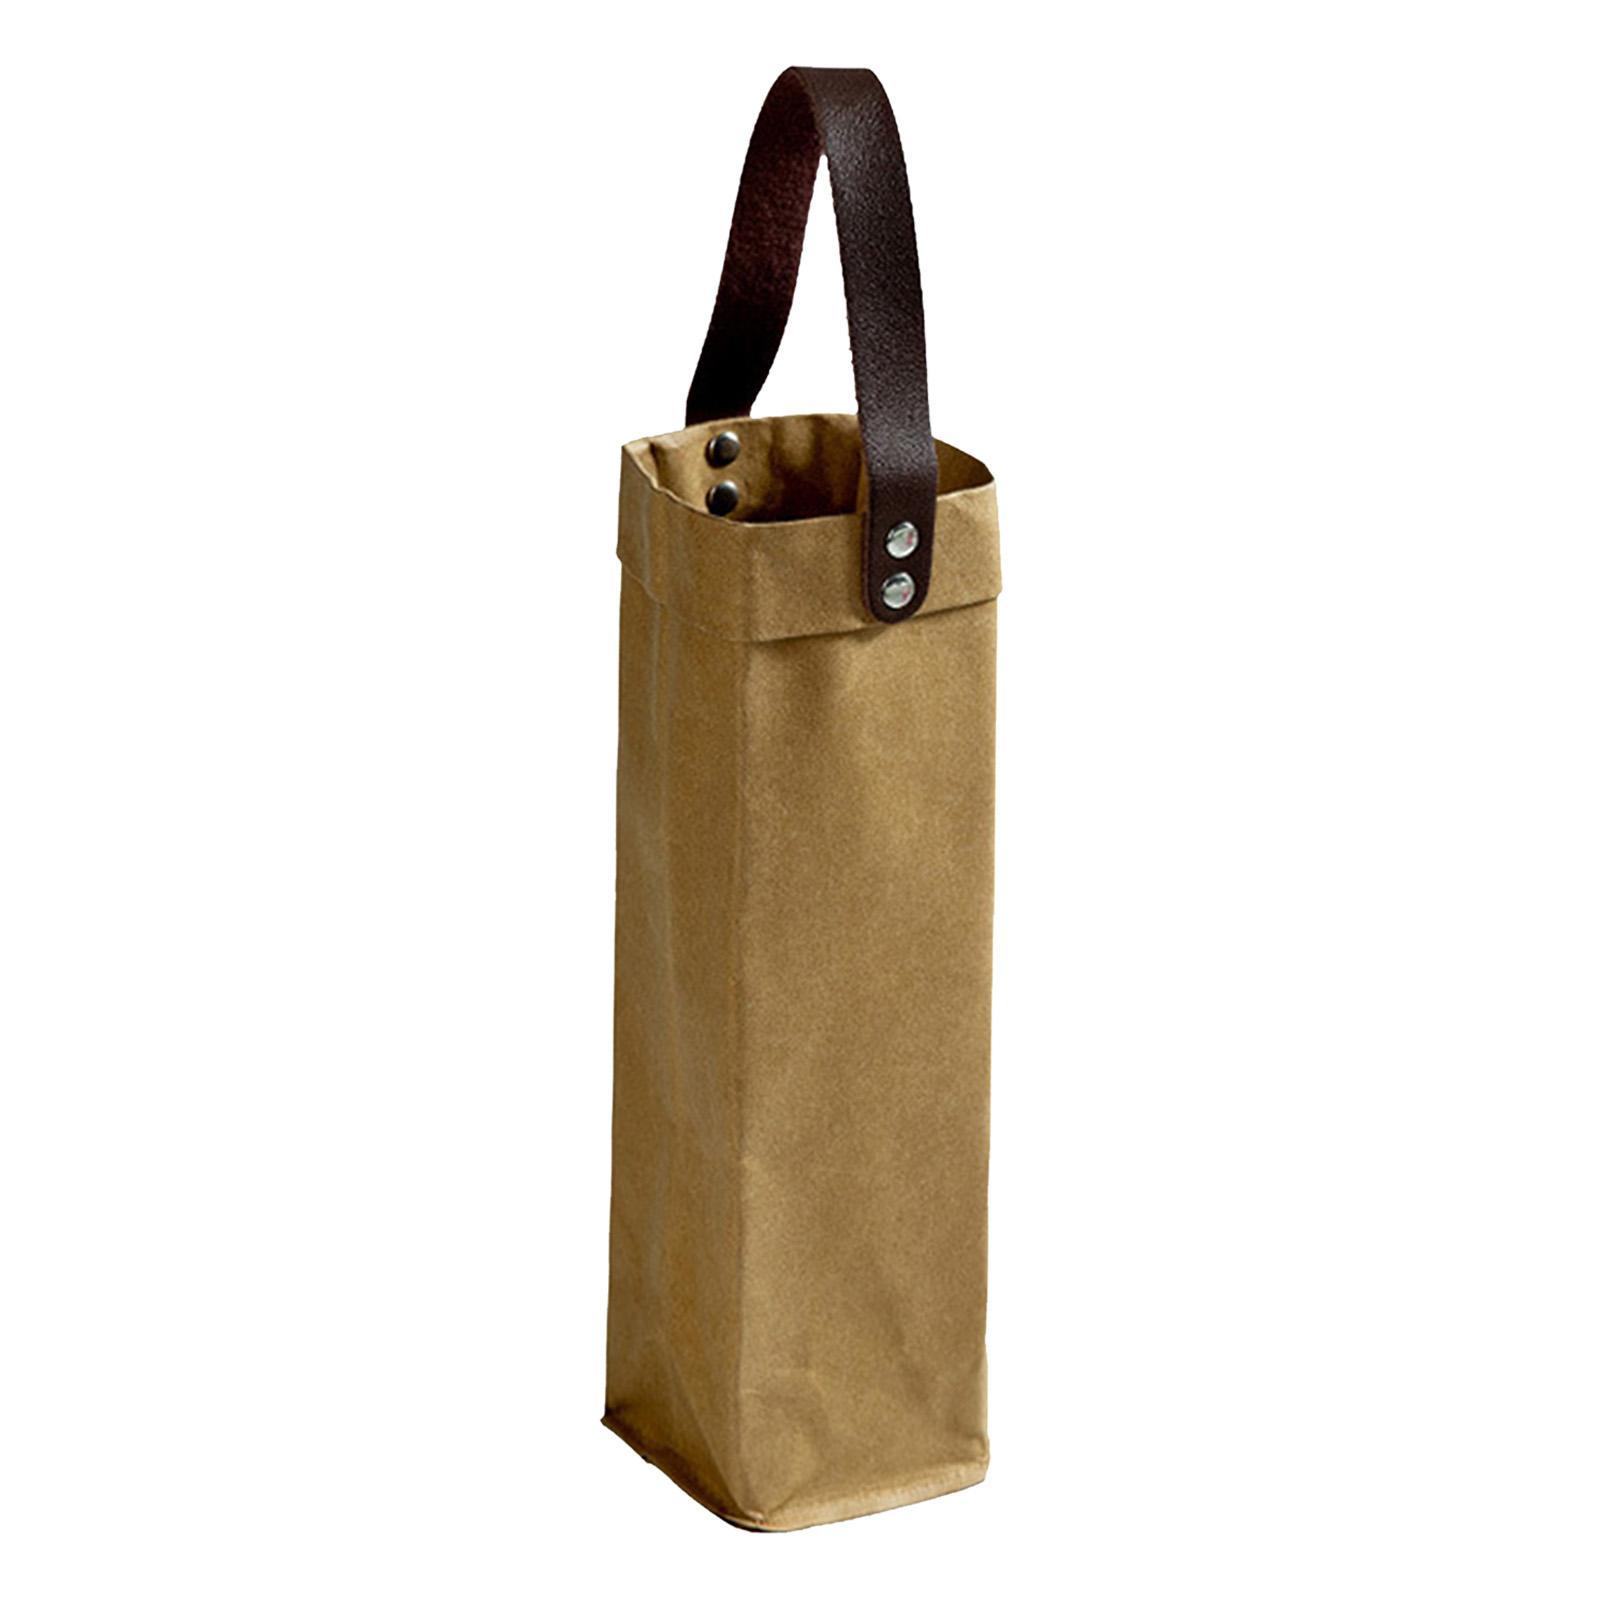 Bottles Bags Storage Bag Shopping Bags Wrapping Bag Gift Bag for Birthday Valentine